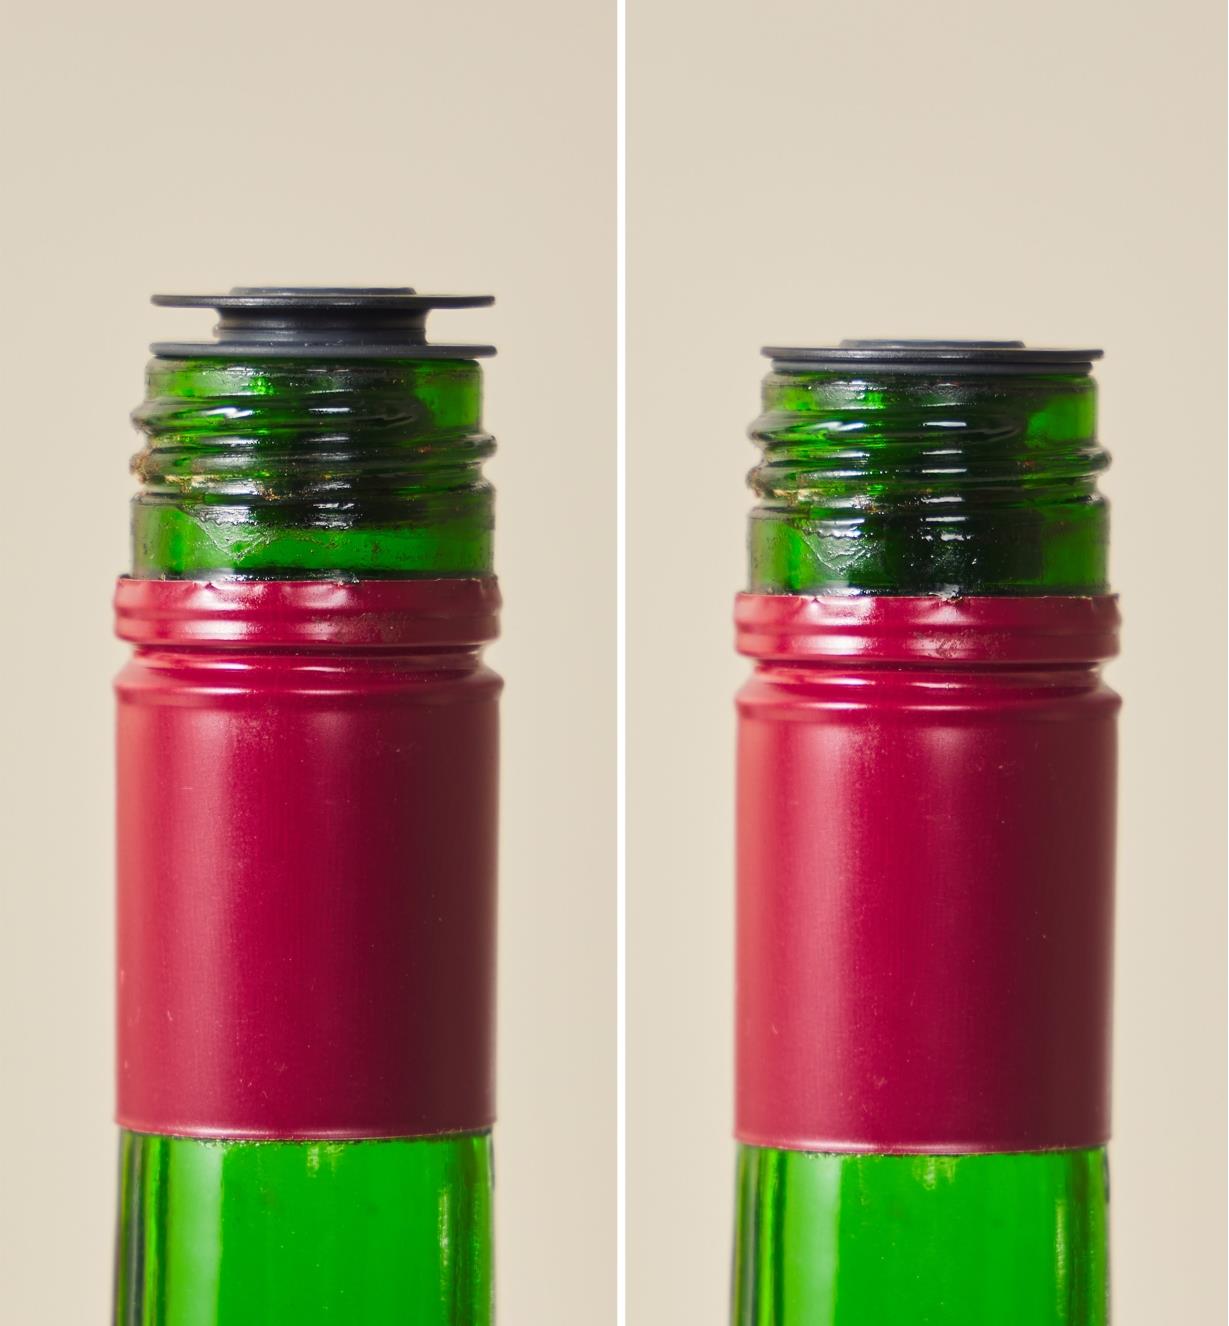 A bottle sealed with an Airtender stopper and one with an Airtender stopper set loosely in the neck